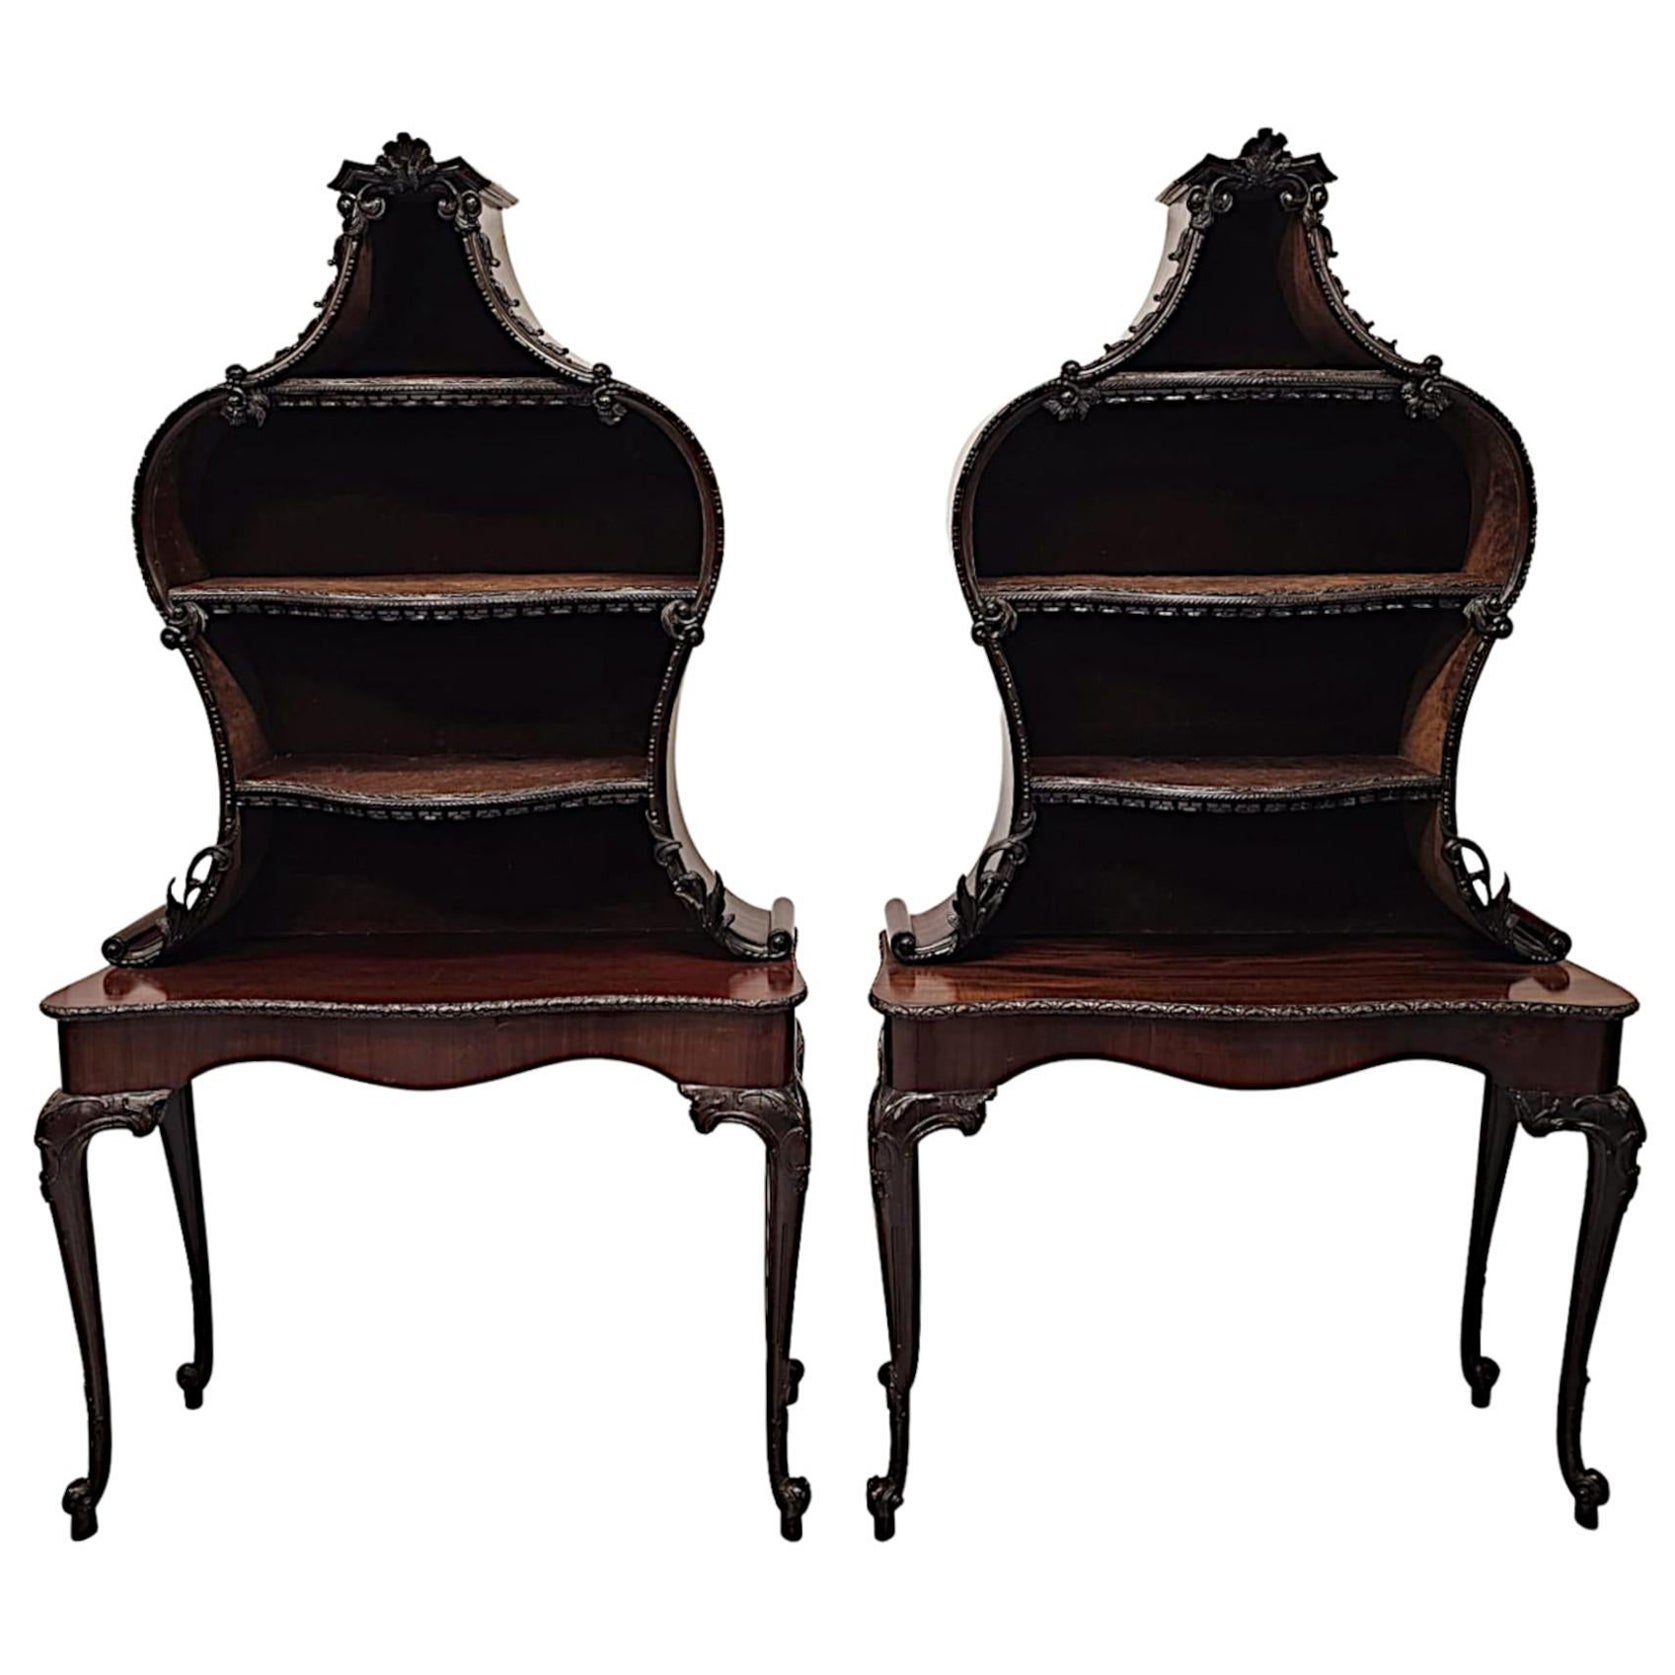 A Very Rare and Fine 19th Century  Pair of Mahogany Bookcases or Display Cases For Sale